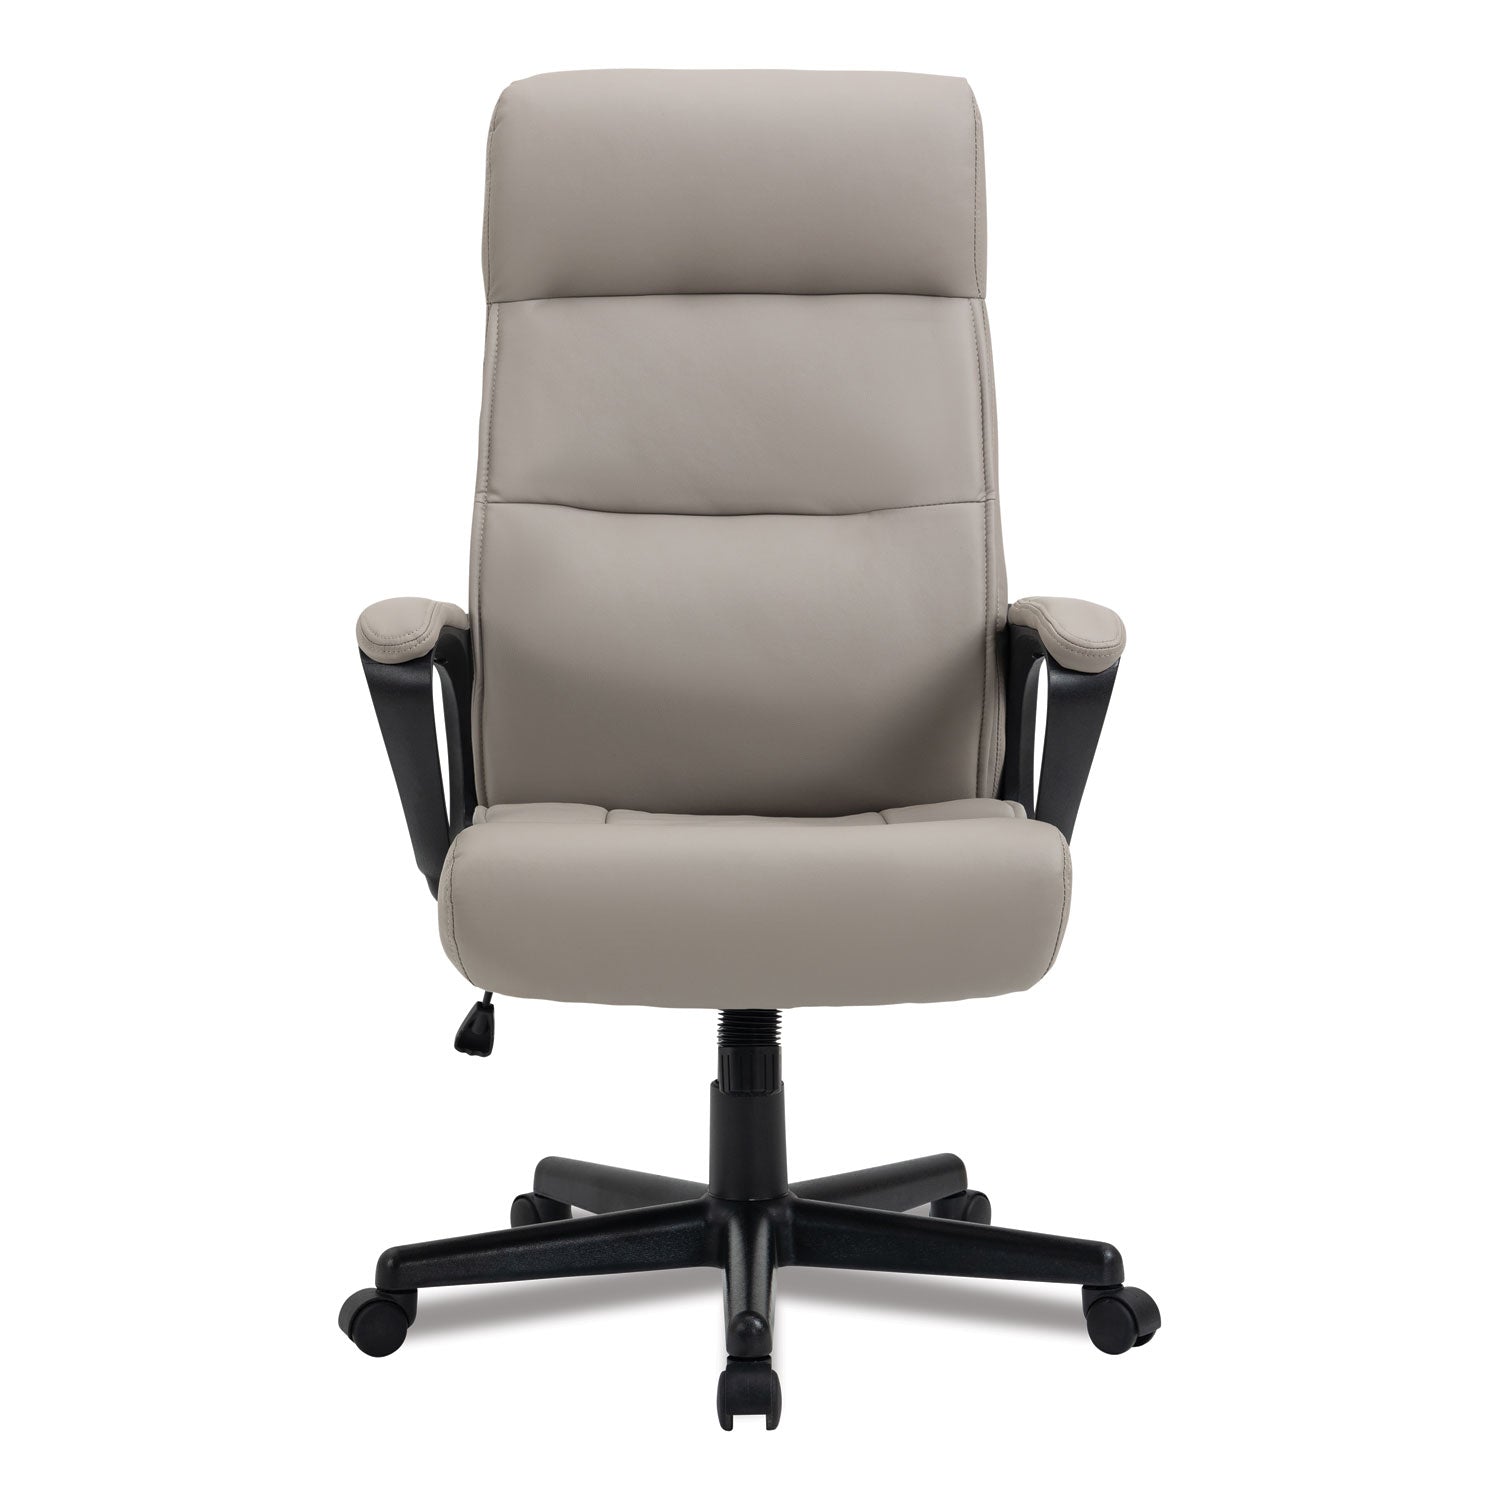 alera-oxnam-series-high-back-task-chair-supports-up-to-275-lbs-1756-to-2138-seat-height-tan-seat-back-black-base_aleon41b59 - 2